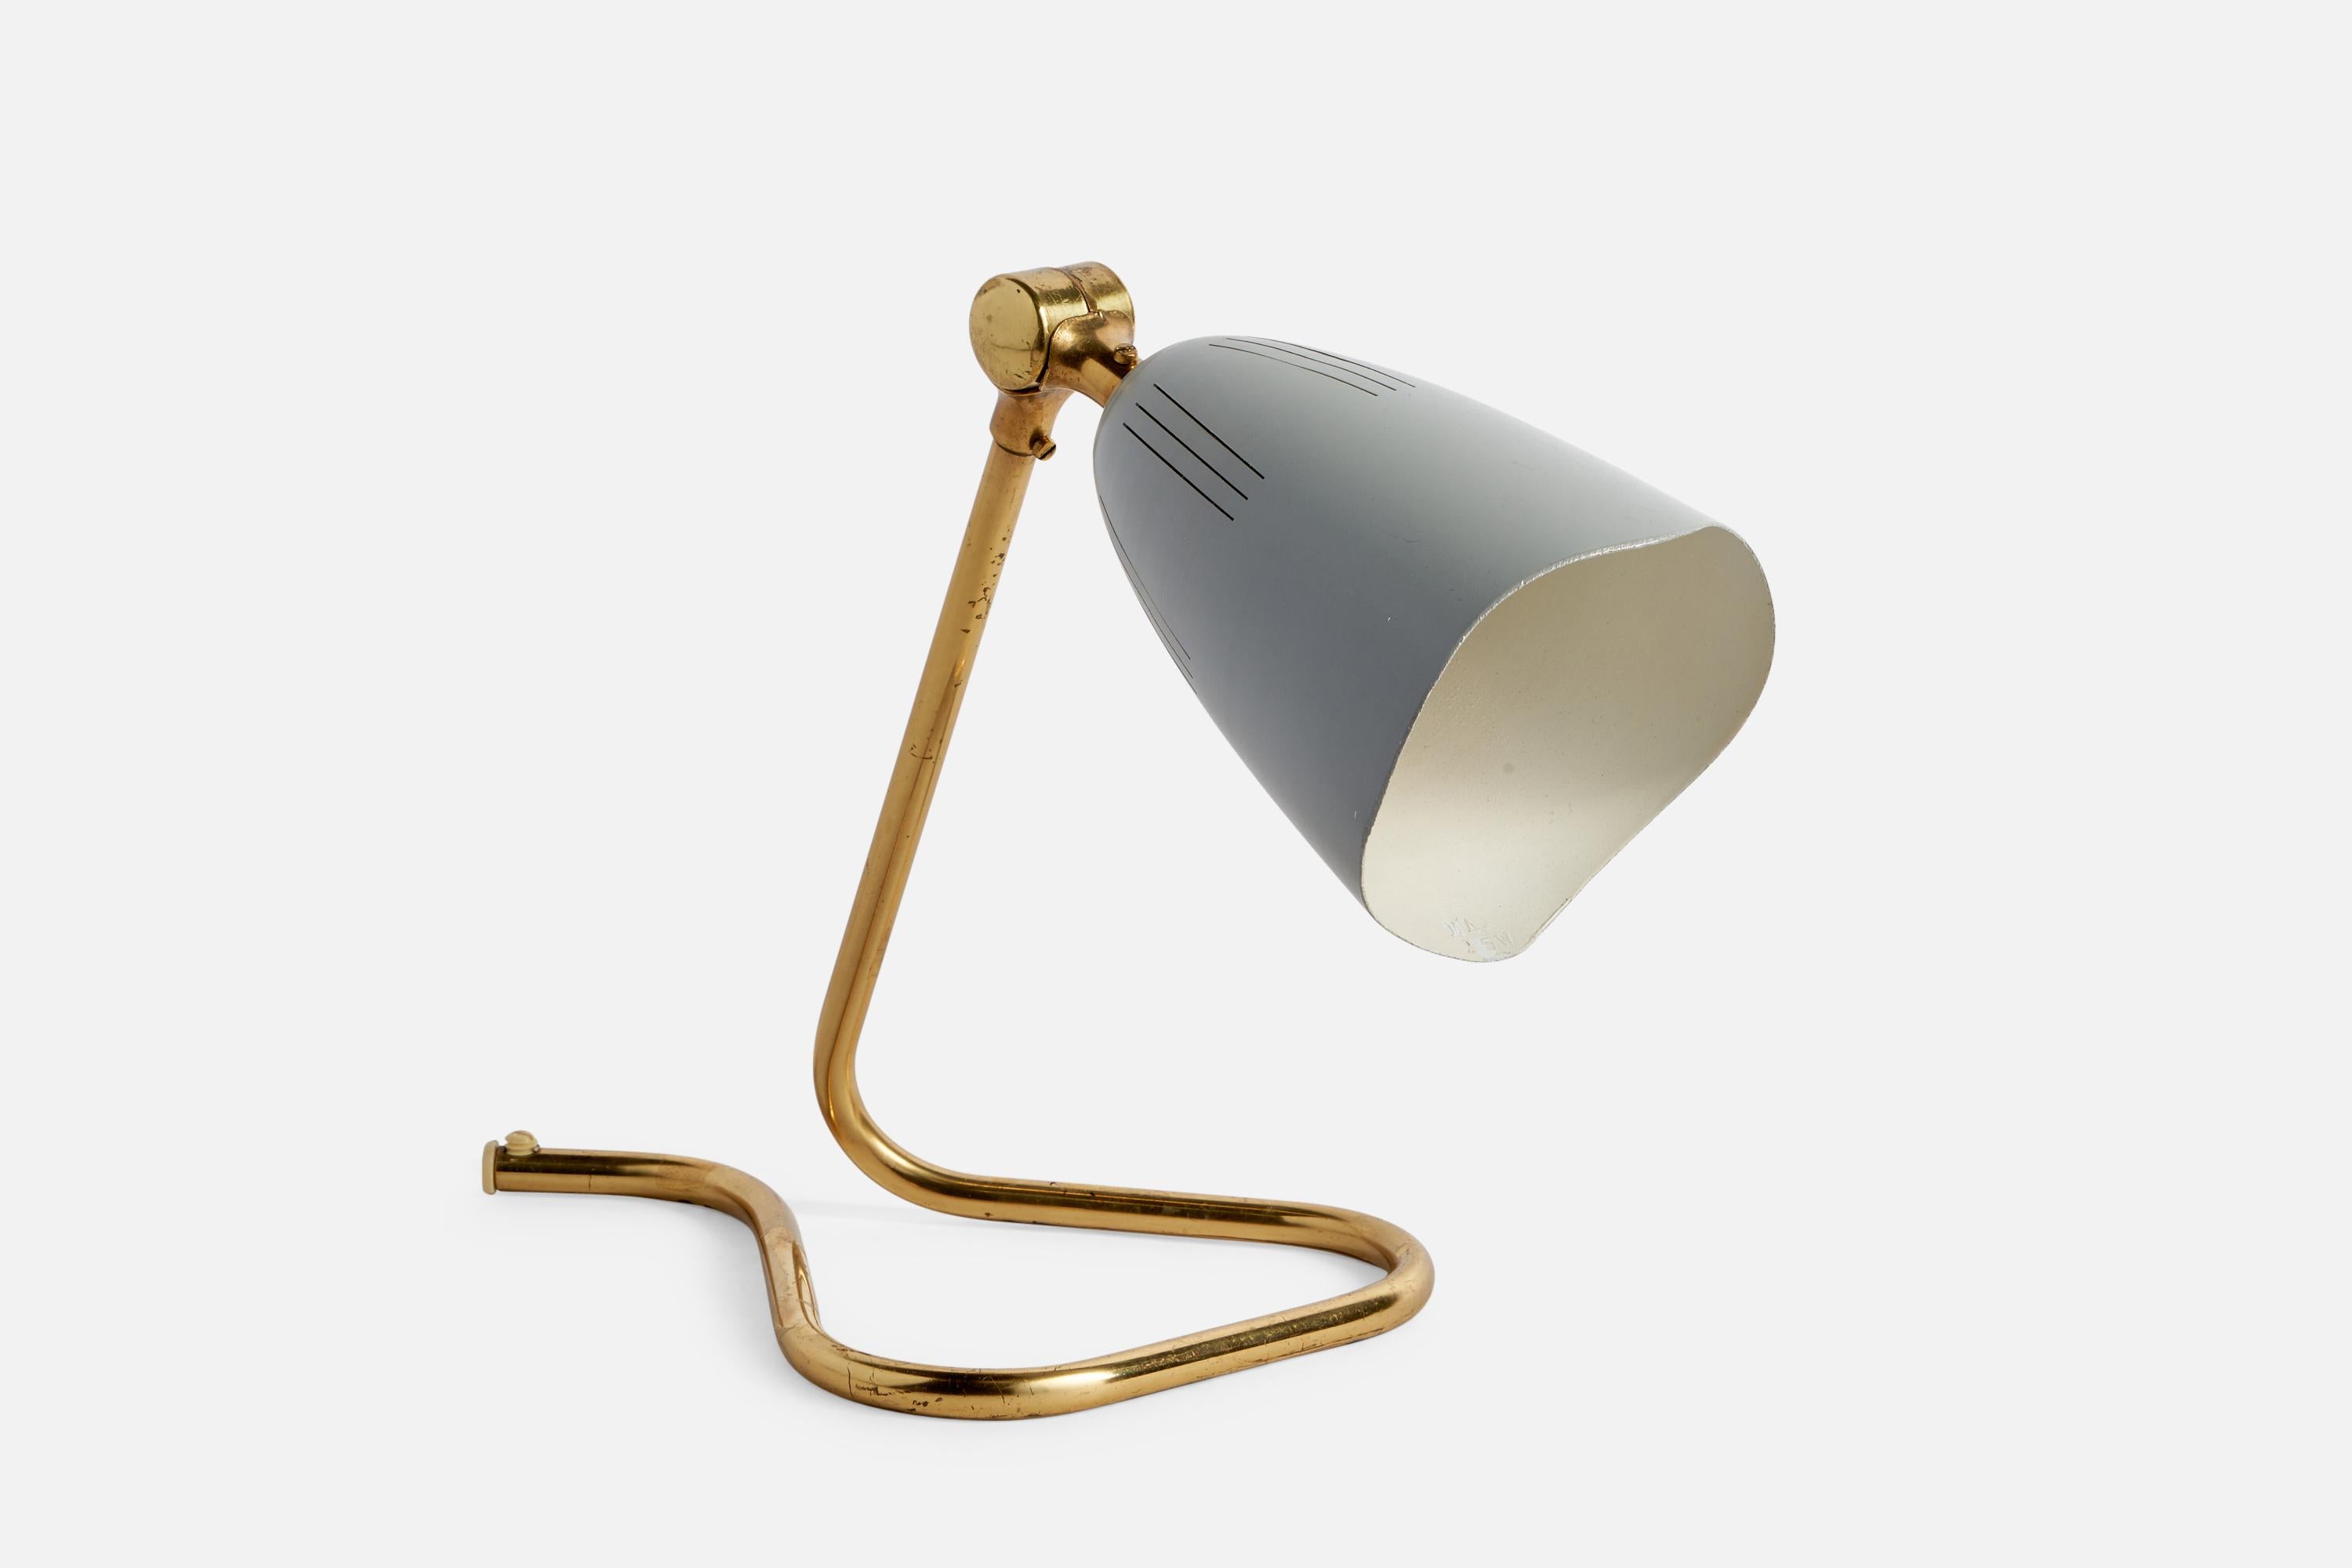 A brass and grey-lacquered metal table lamp designed and produced in Sweden, c. 1950s.

Overall Dimensions (inches): 8.75” H x 6” W x 12” D
Bulb Specifications: E-26 Bulb
Number of Sockets: 1
All lighting will be converted for US usage. We are